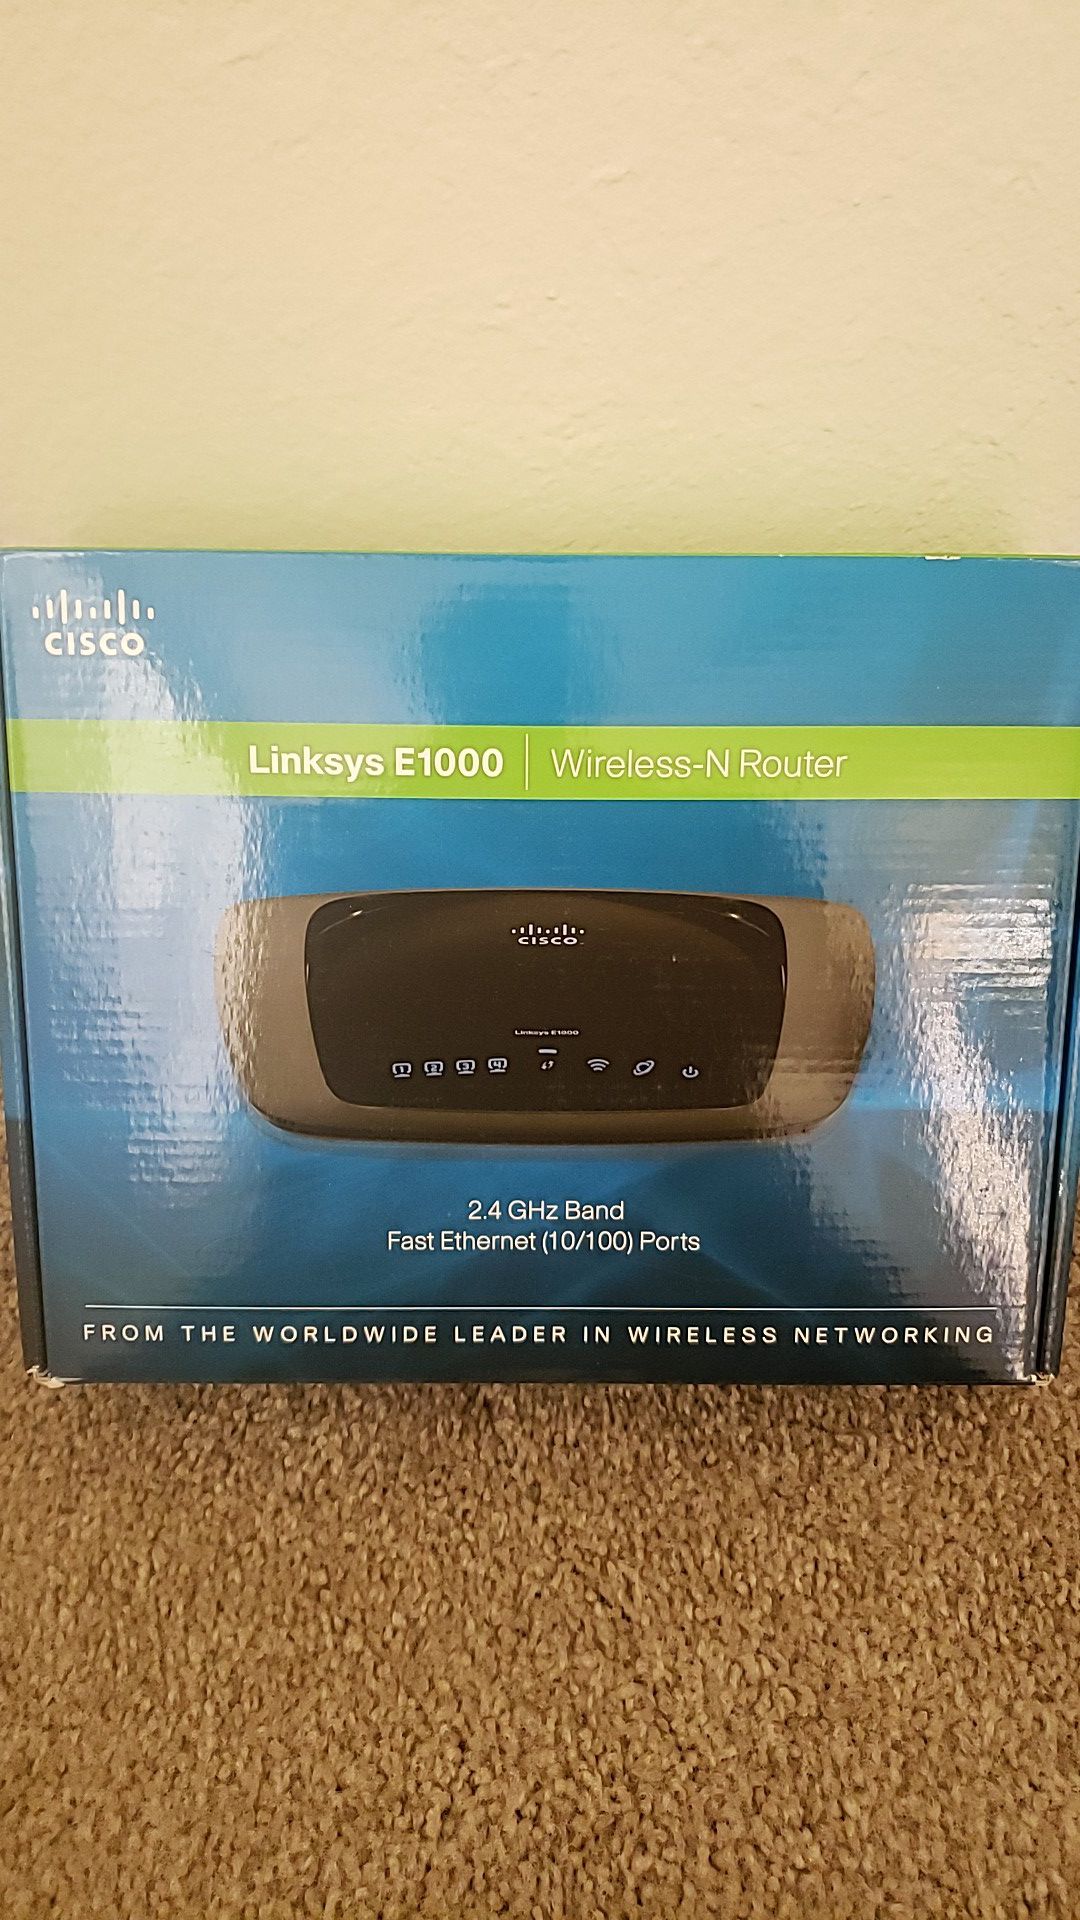 Linksys E1000 wireless-N router